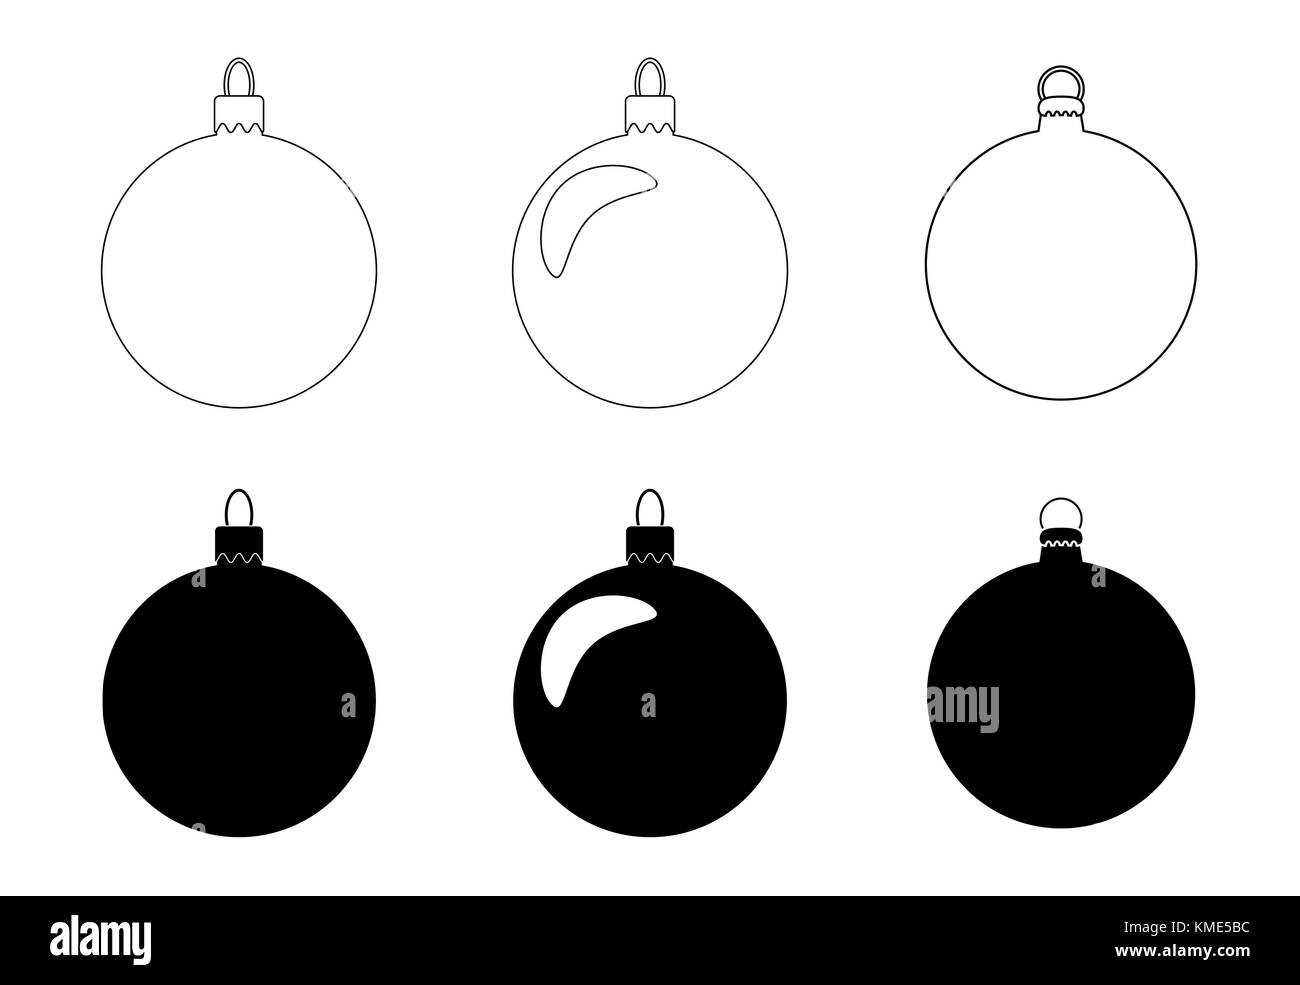 Simple Bauble silhouette set for christmas tree isolated on white background Stock Vector